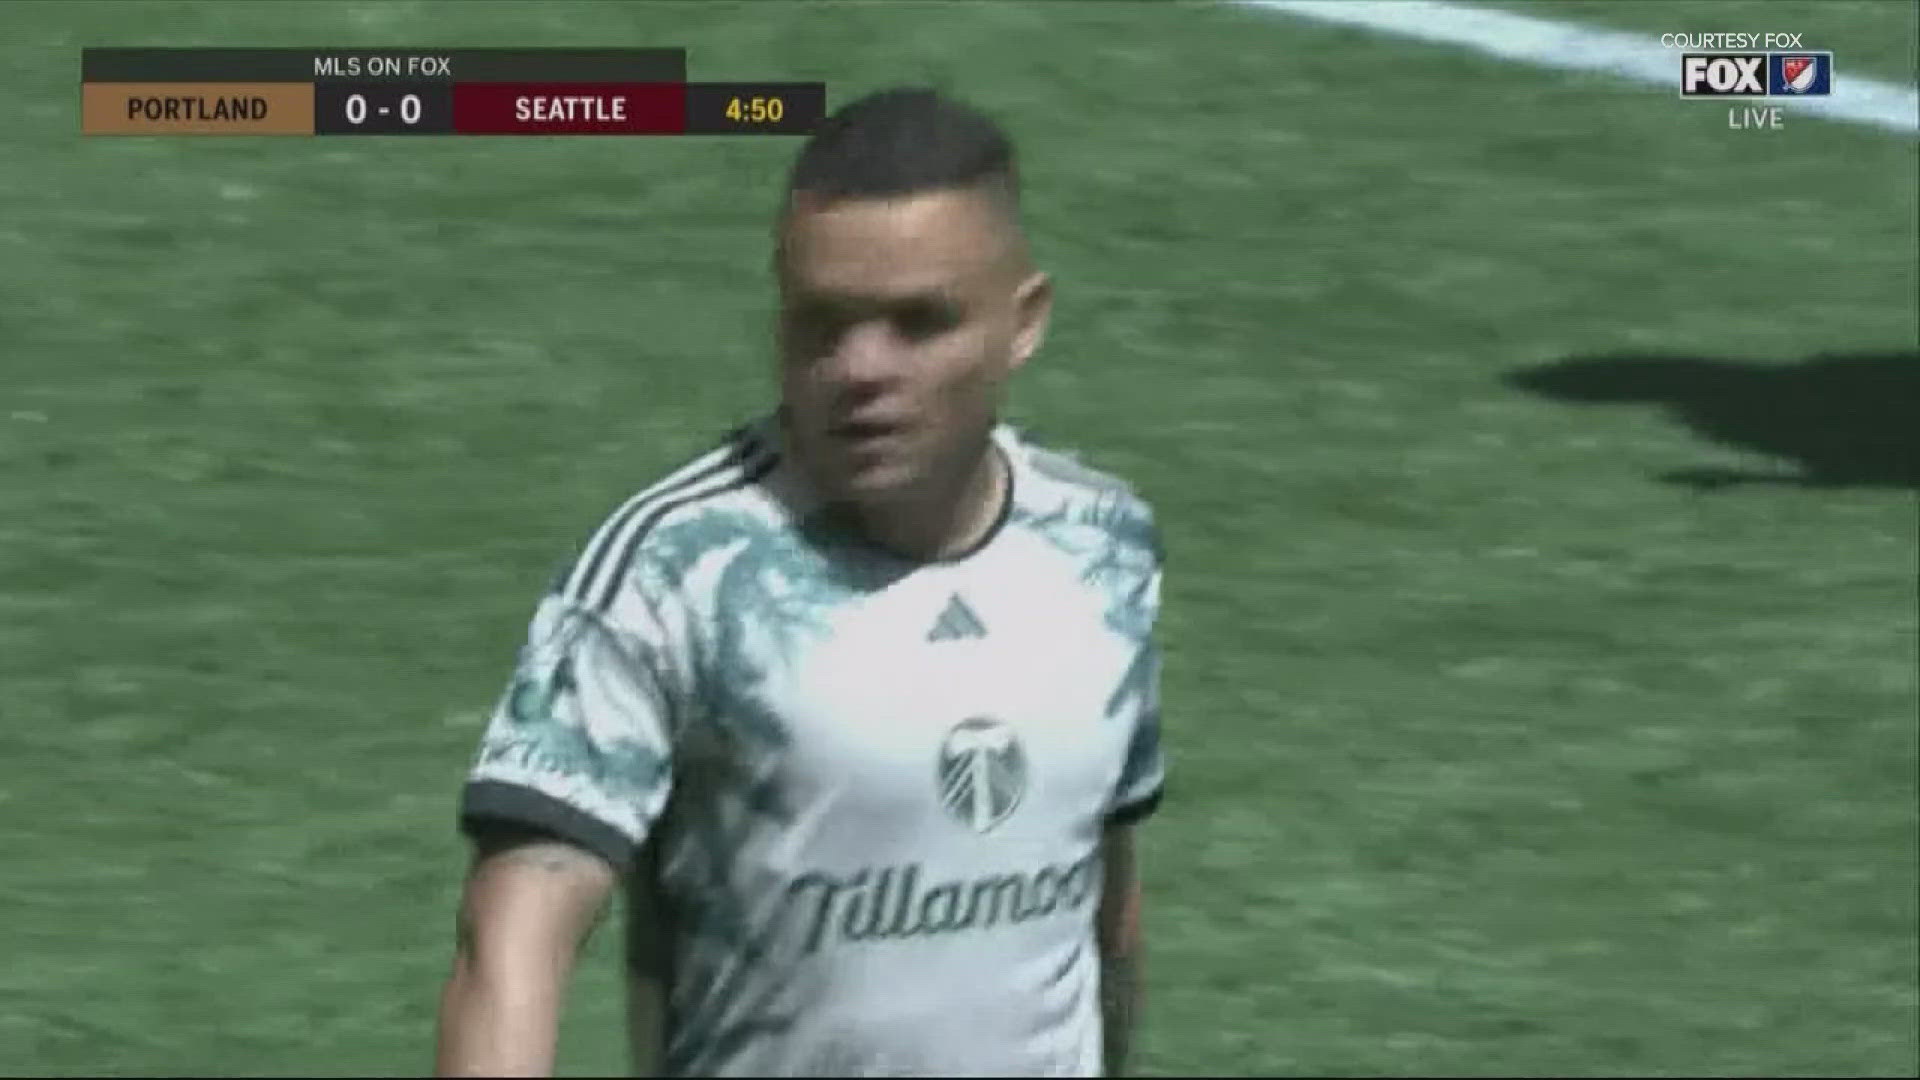 The Oregon-based, farmer-owned dairy cooperative made its debut on the Timbers kit in Sunday’s match against the Seattle Sounders FC.